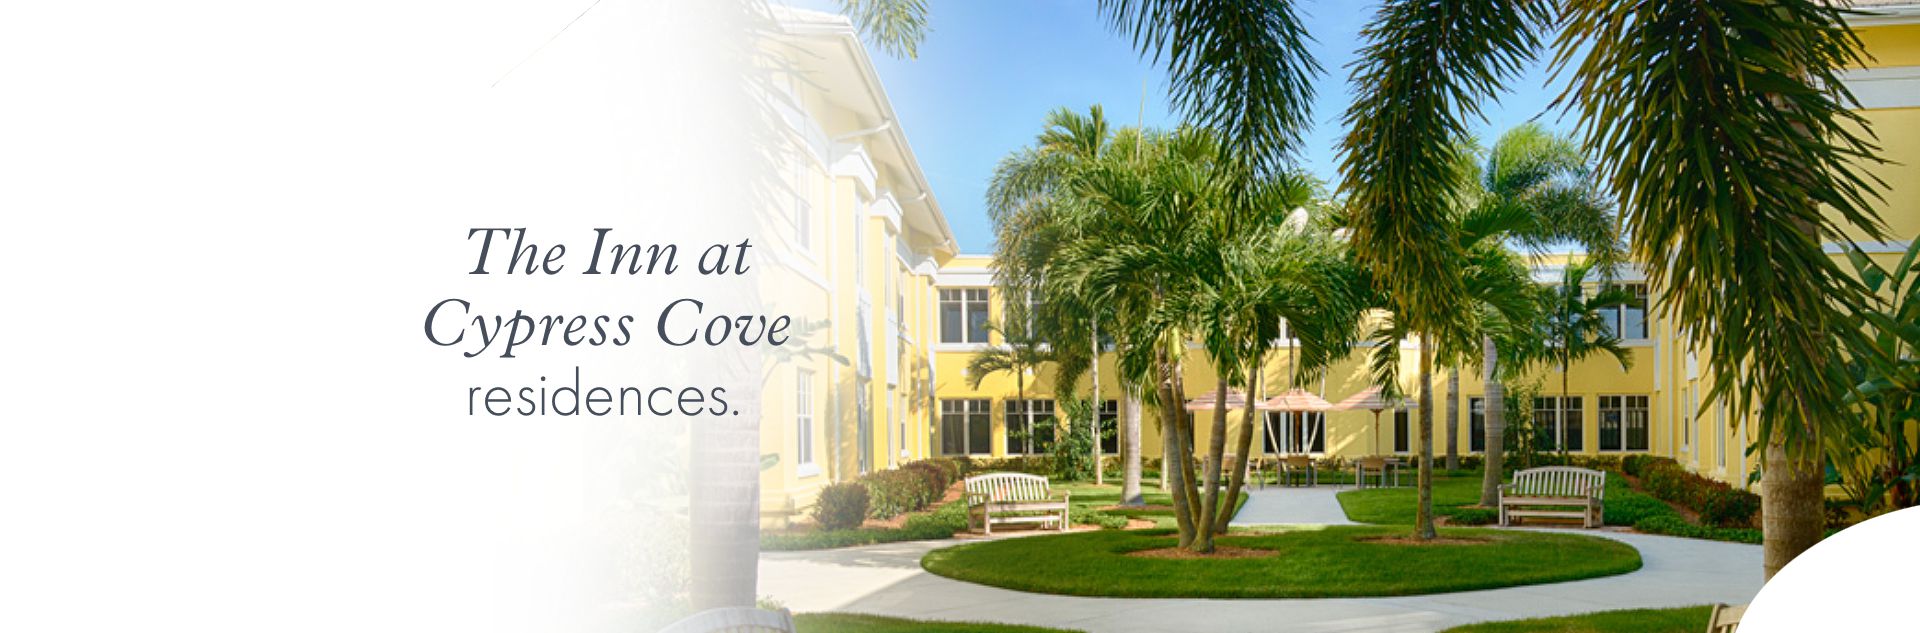 The Inn at Cypress Cove residences